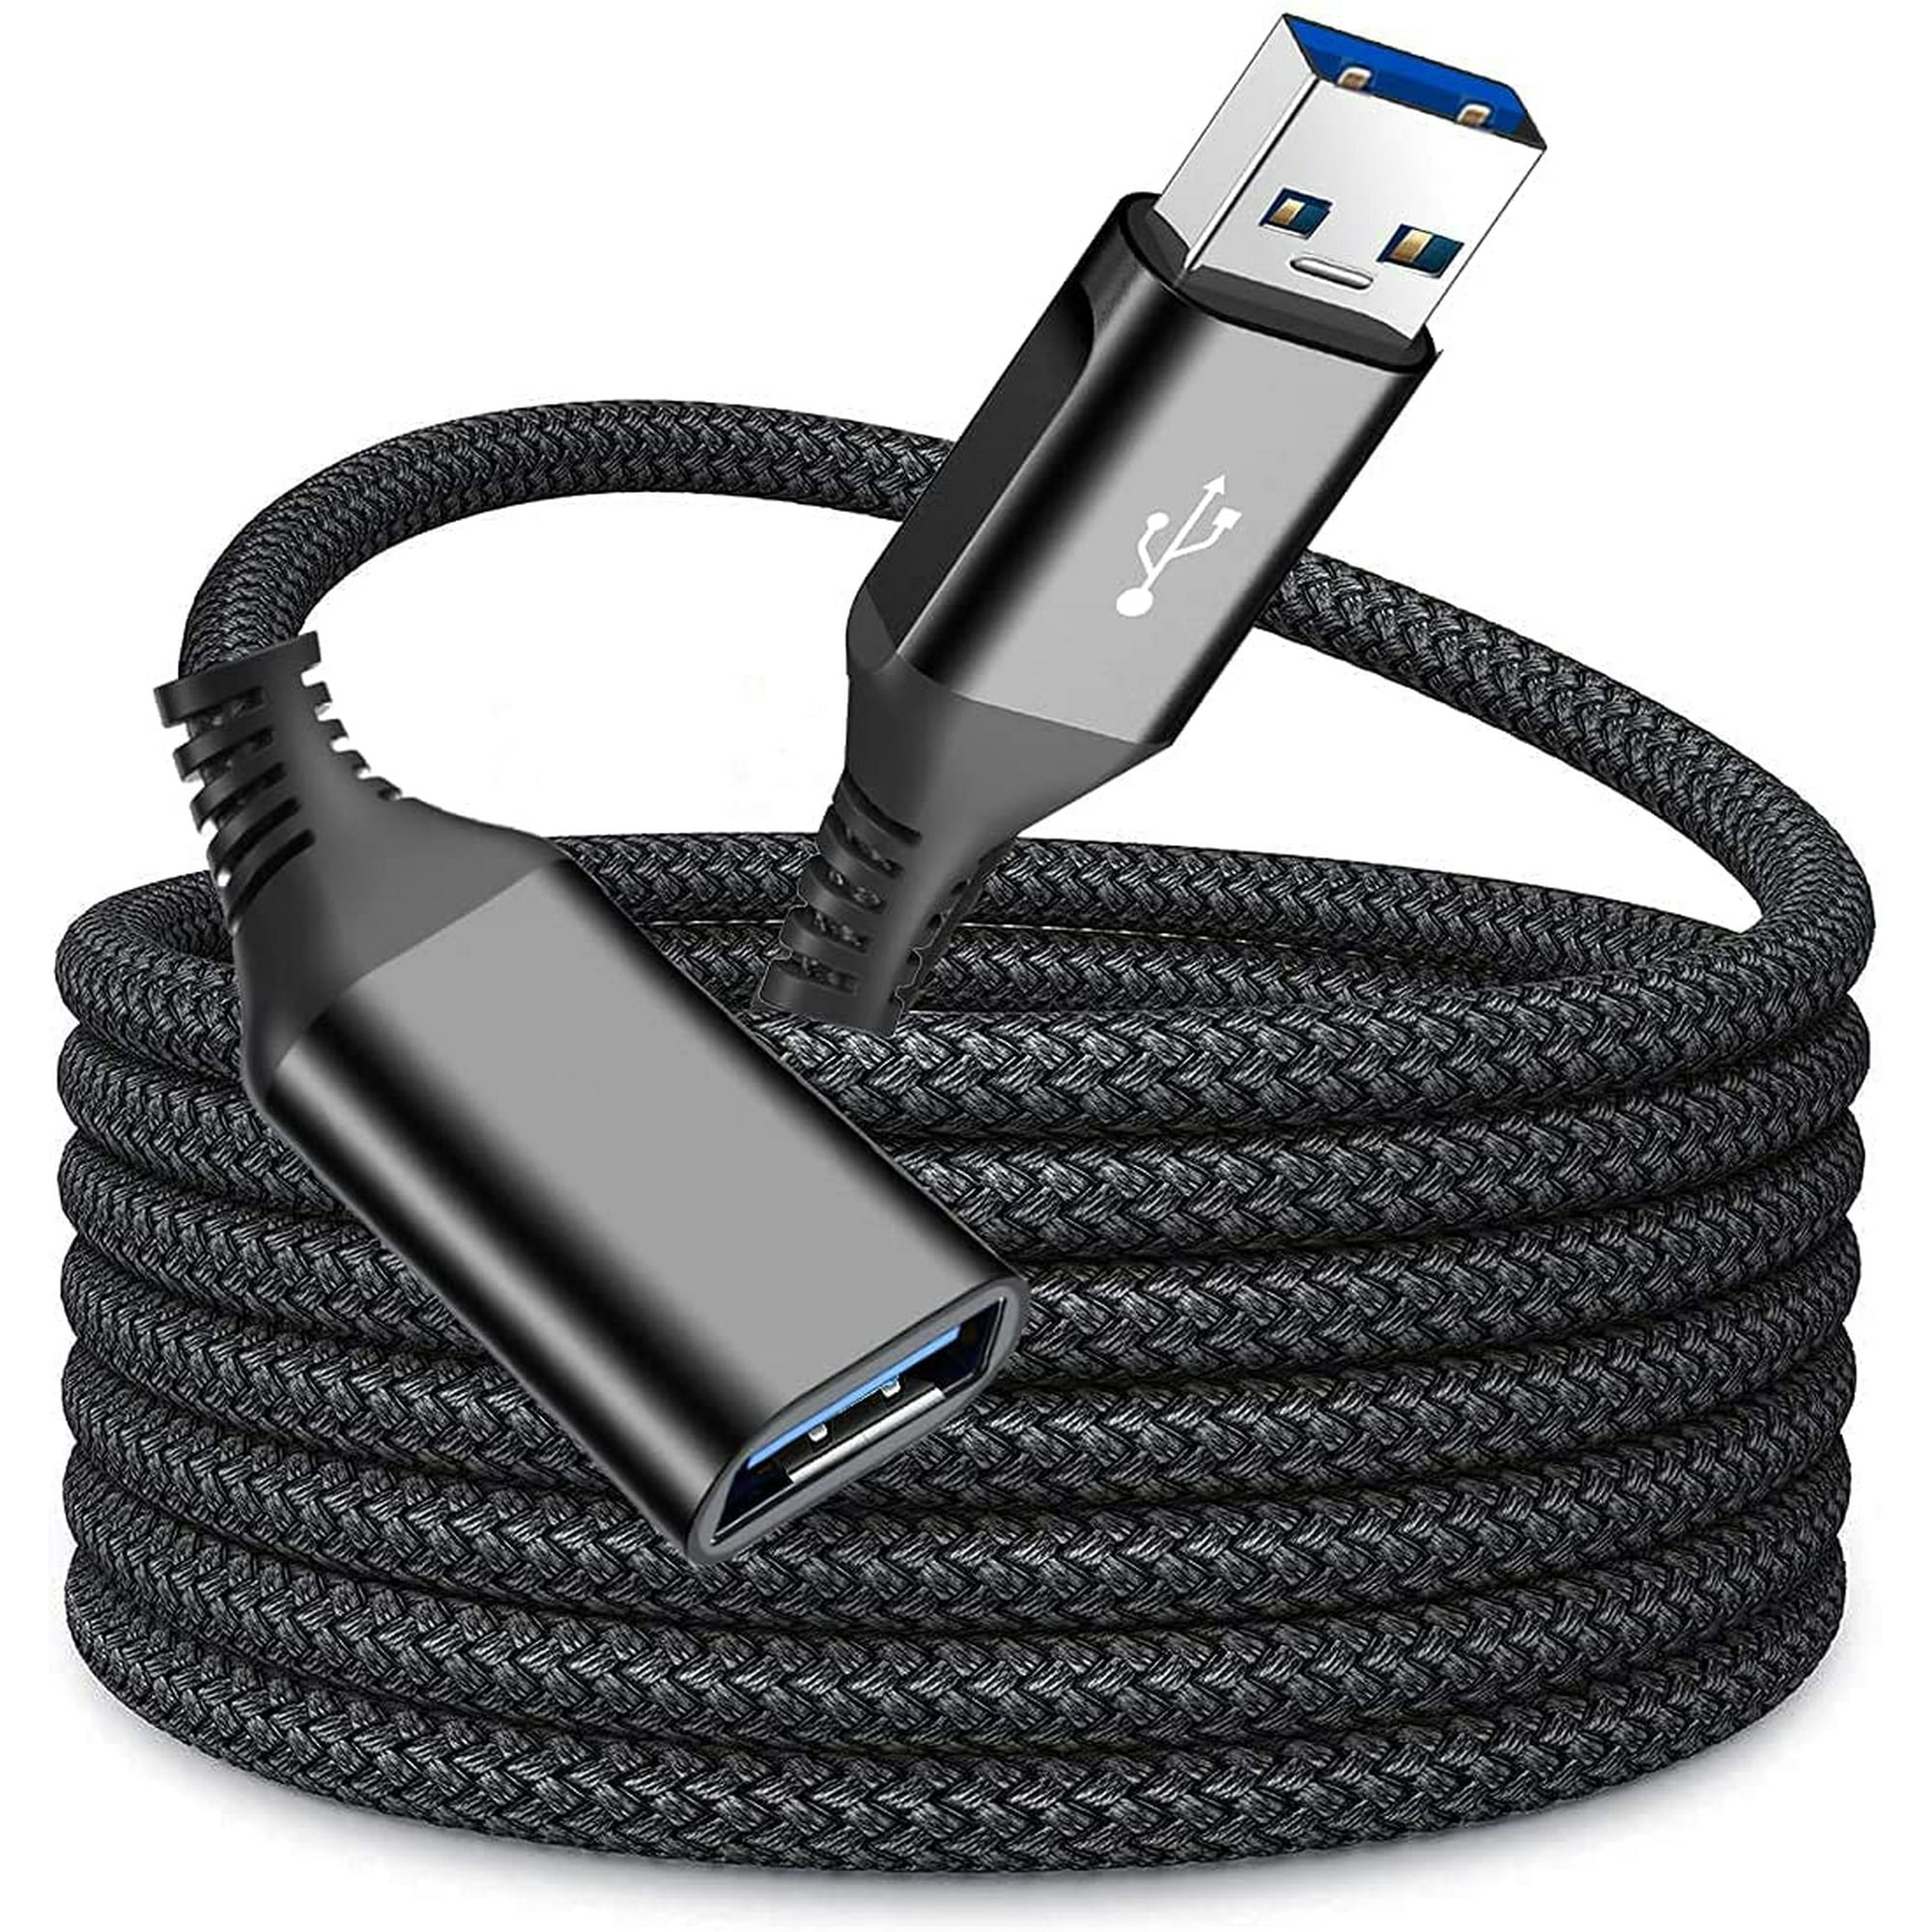 USB 3.1 Extension Cable 10ft, Sweguard Upgraded A Male to Female USB 3.1 Extender Cord Braided Supports High | Walmart Canada